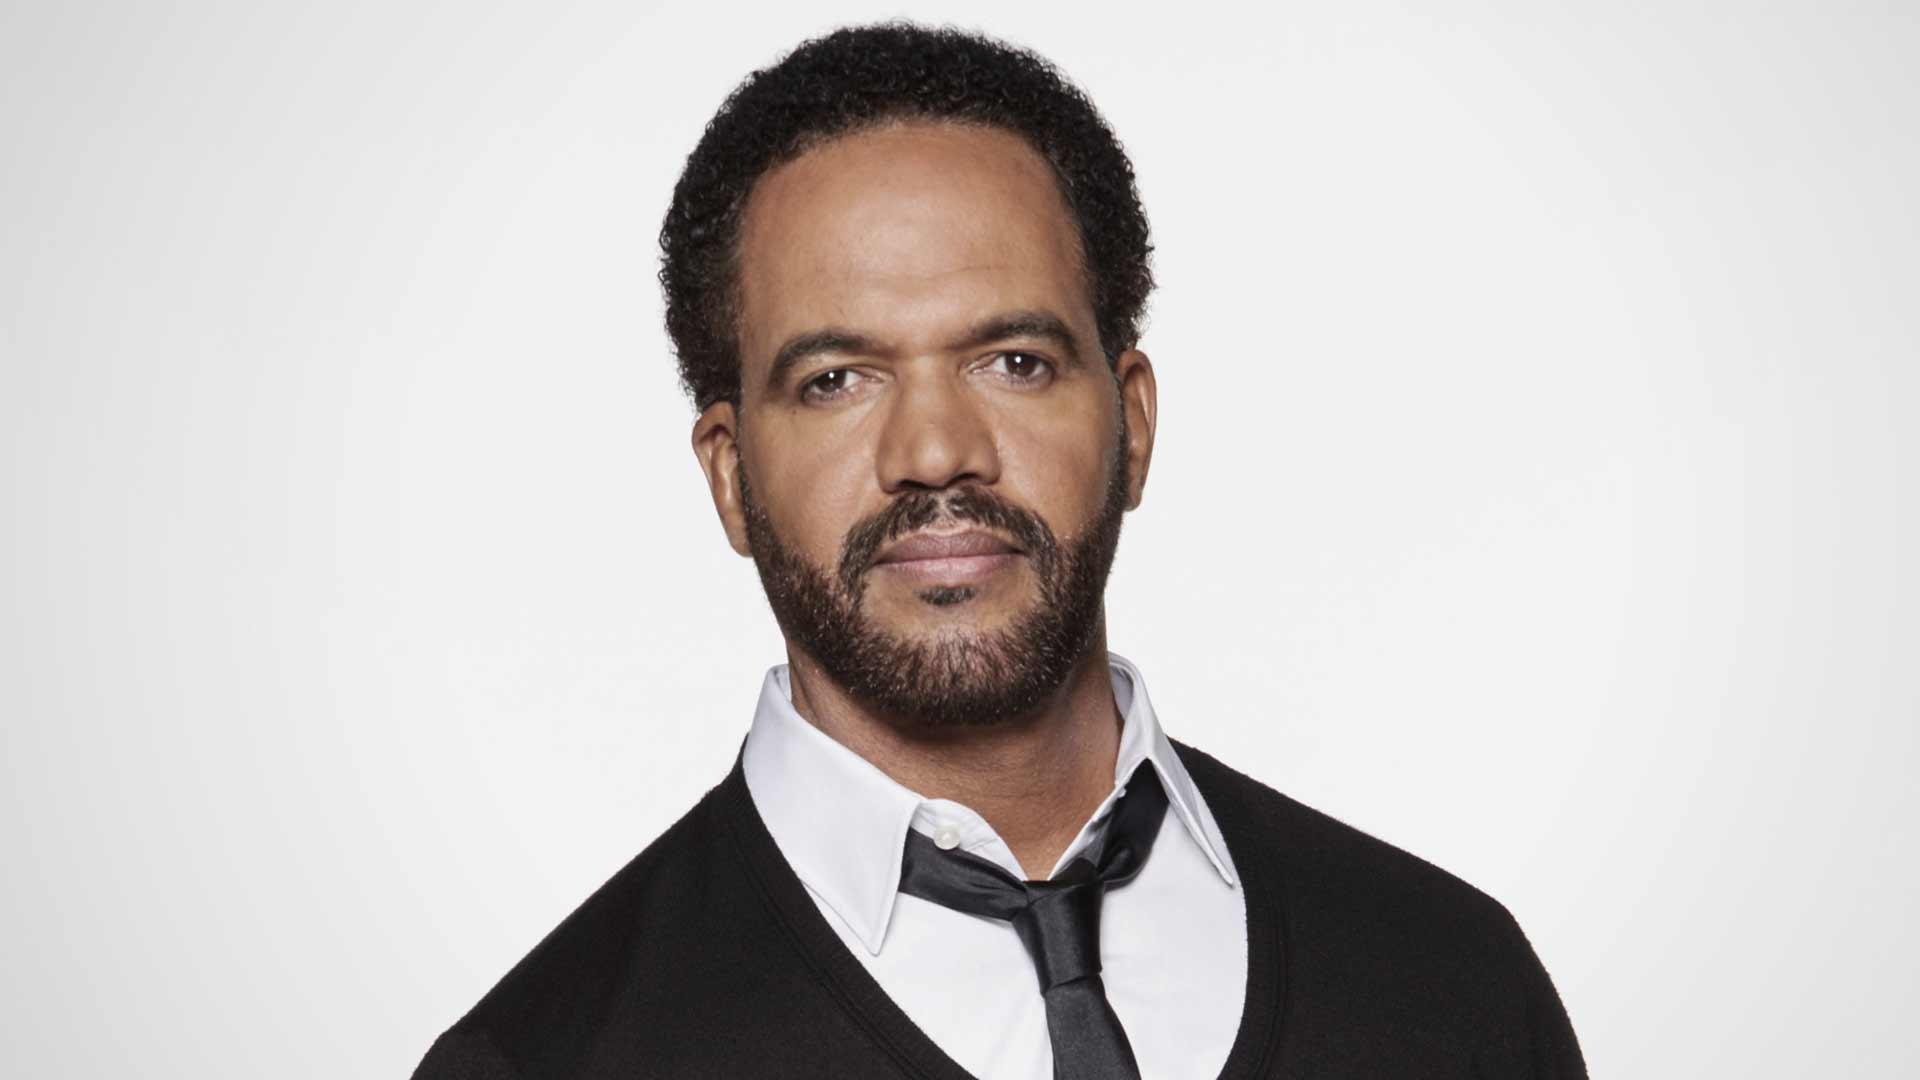 Kristoff St. John Cause of Death Determined to be Heart Disease During Bout of Alcohol Abuse